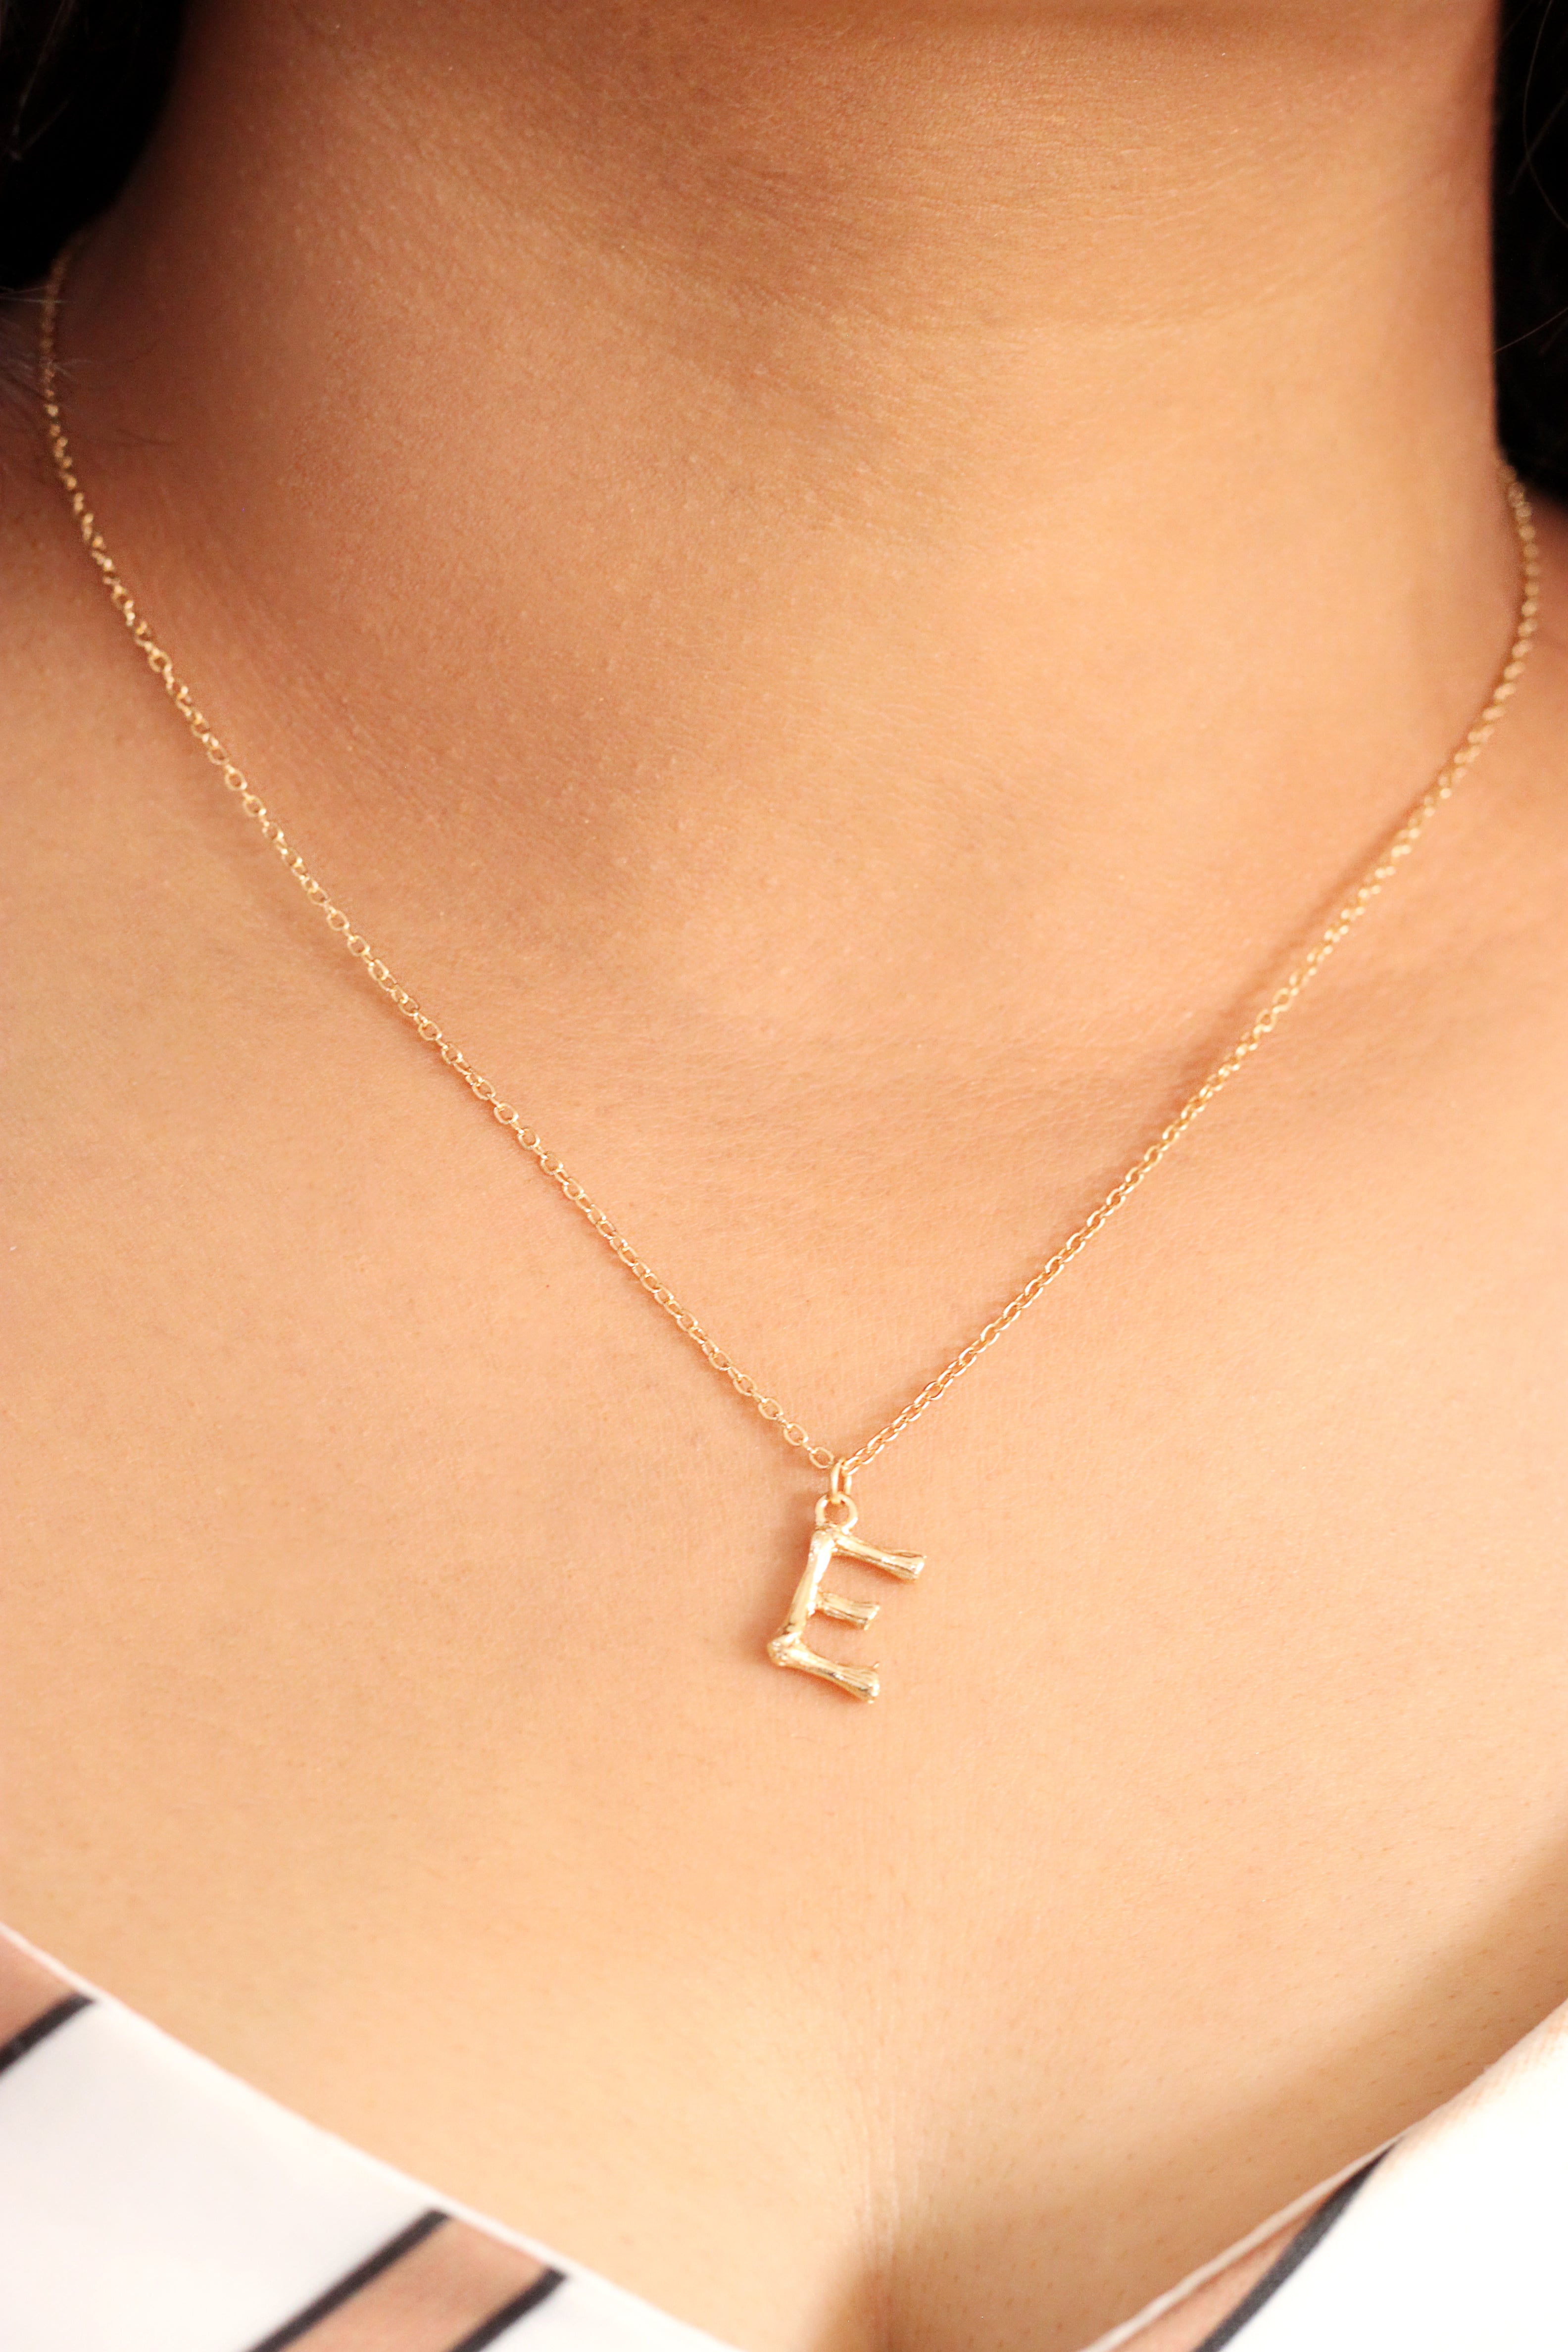 Personalized Initial Charm Necklace